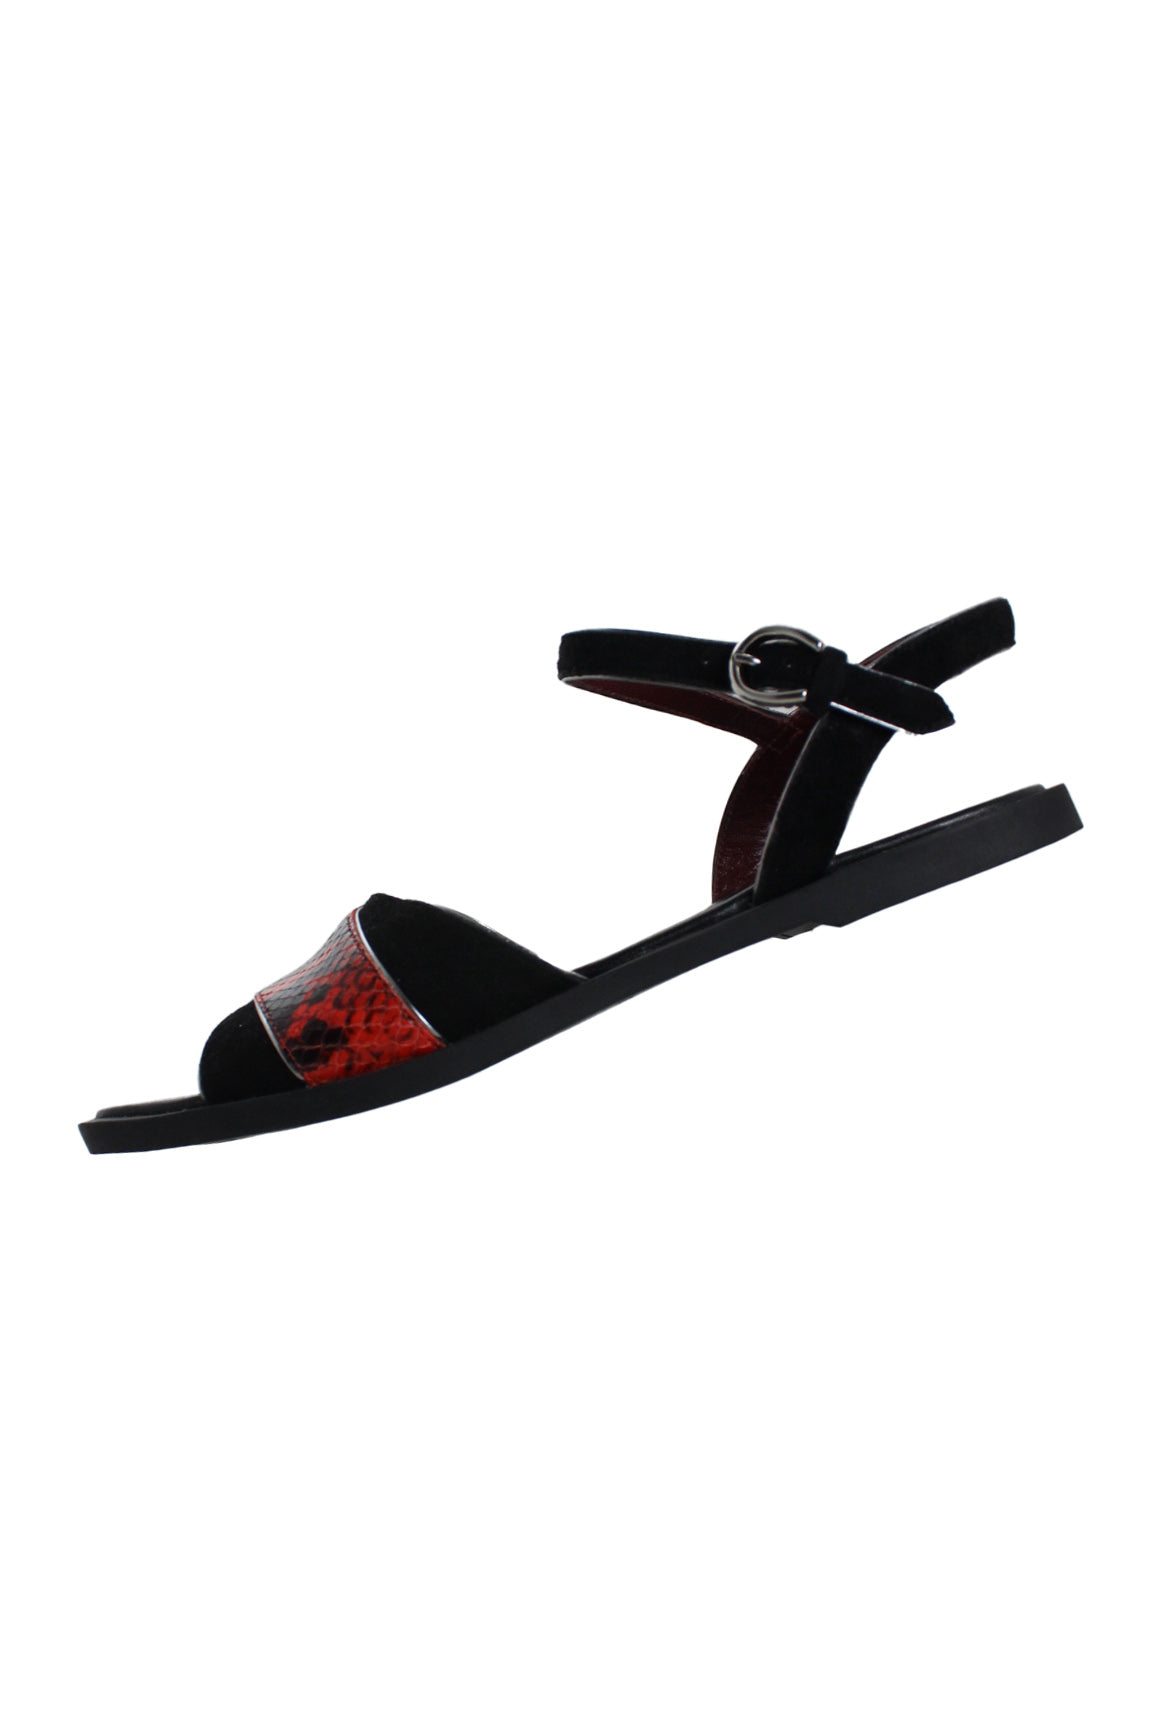 side angle of marc by marc jacobs strappy sandal. snake embossed leather strap across front, open square toe, flat rubber sole, and adjustable buckle suede ankle strap. 